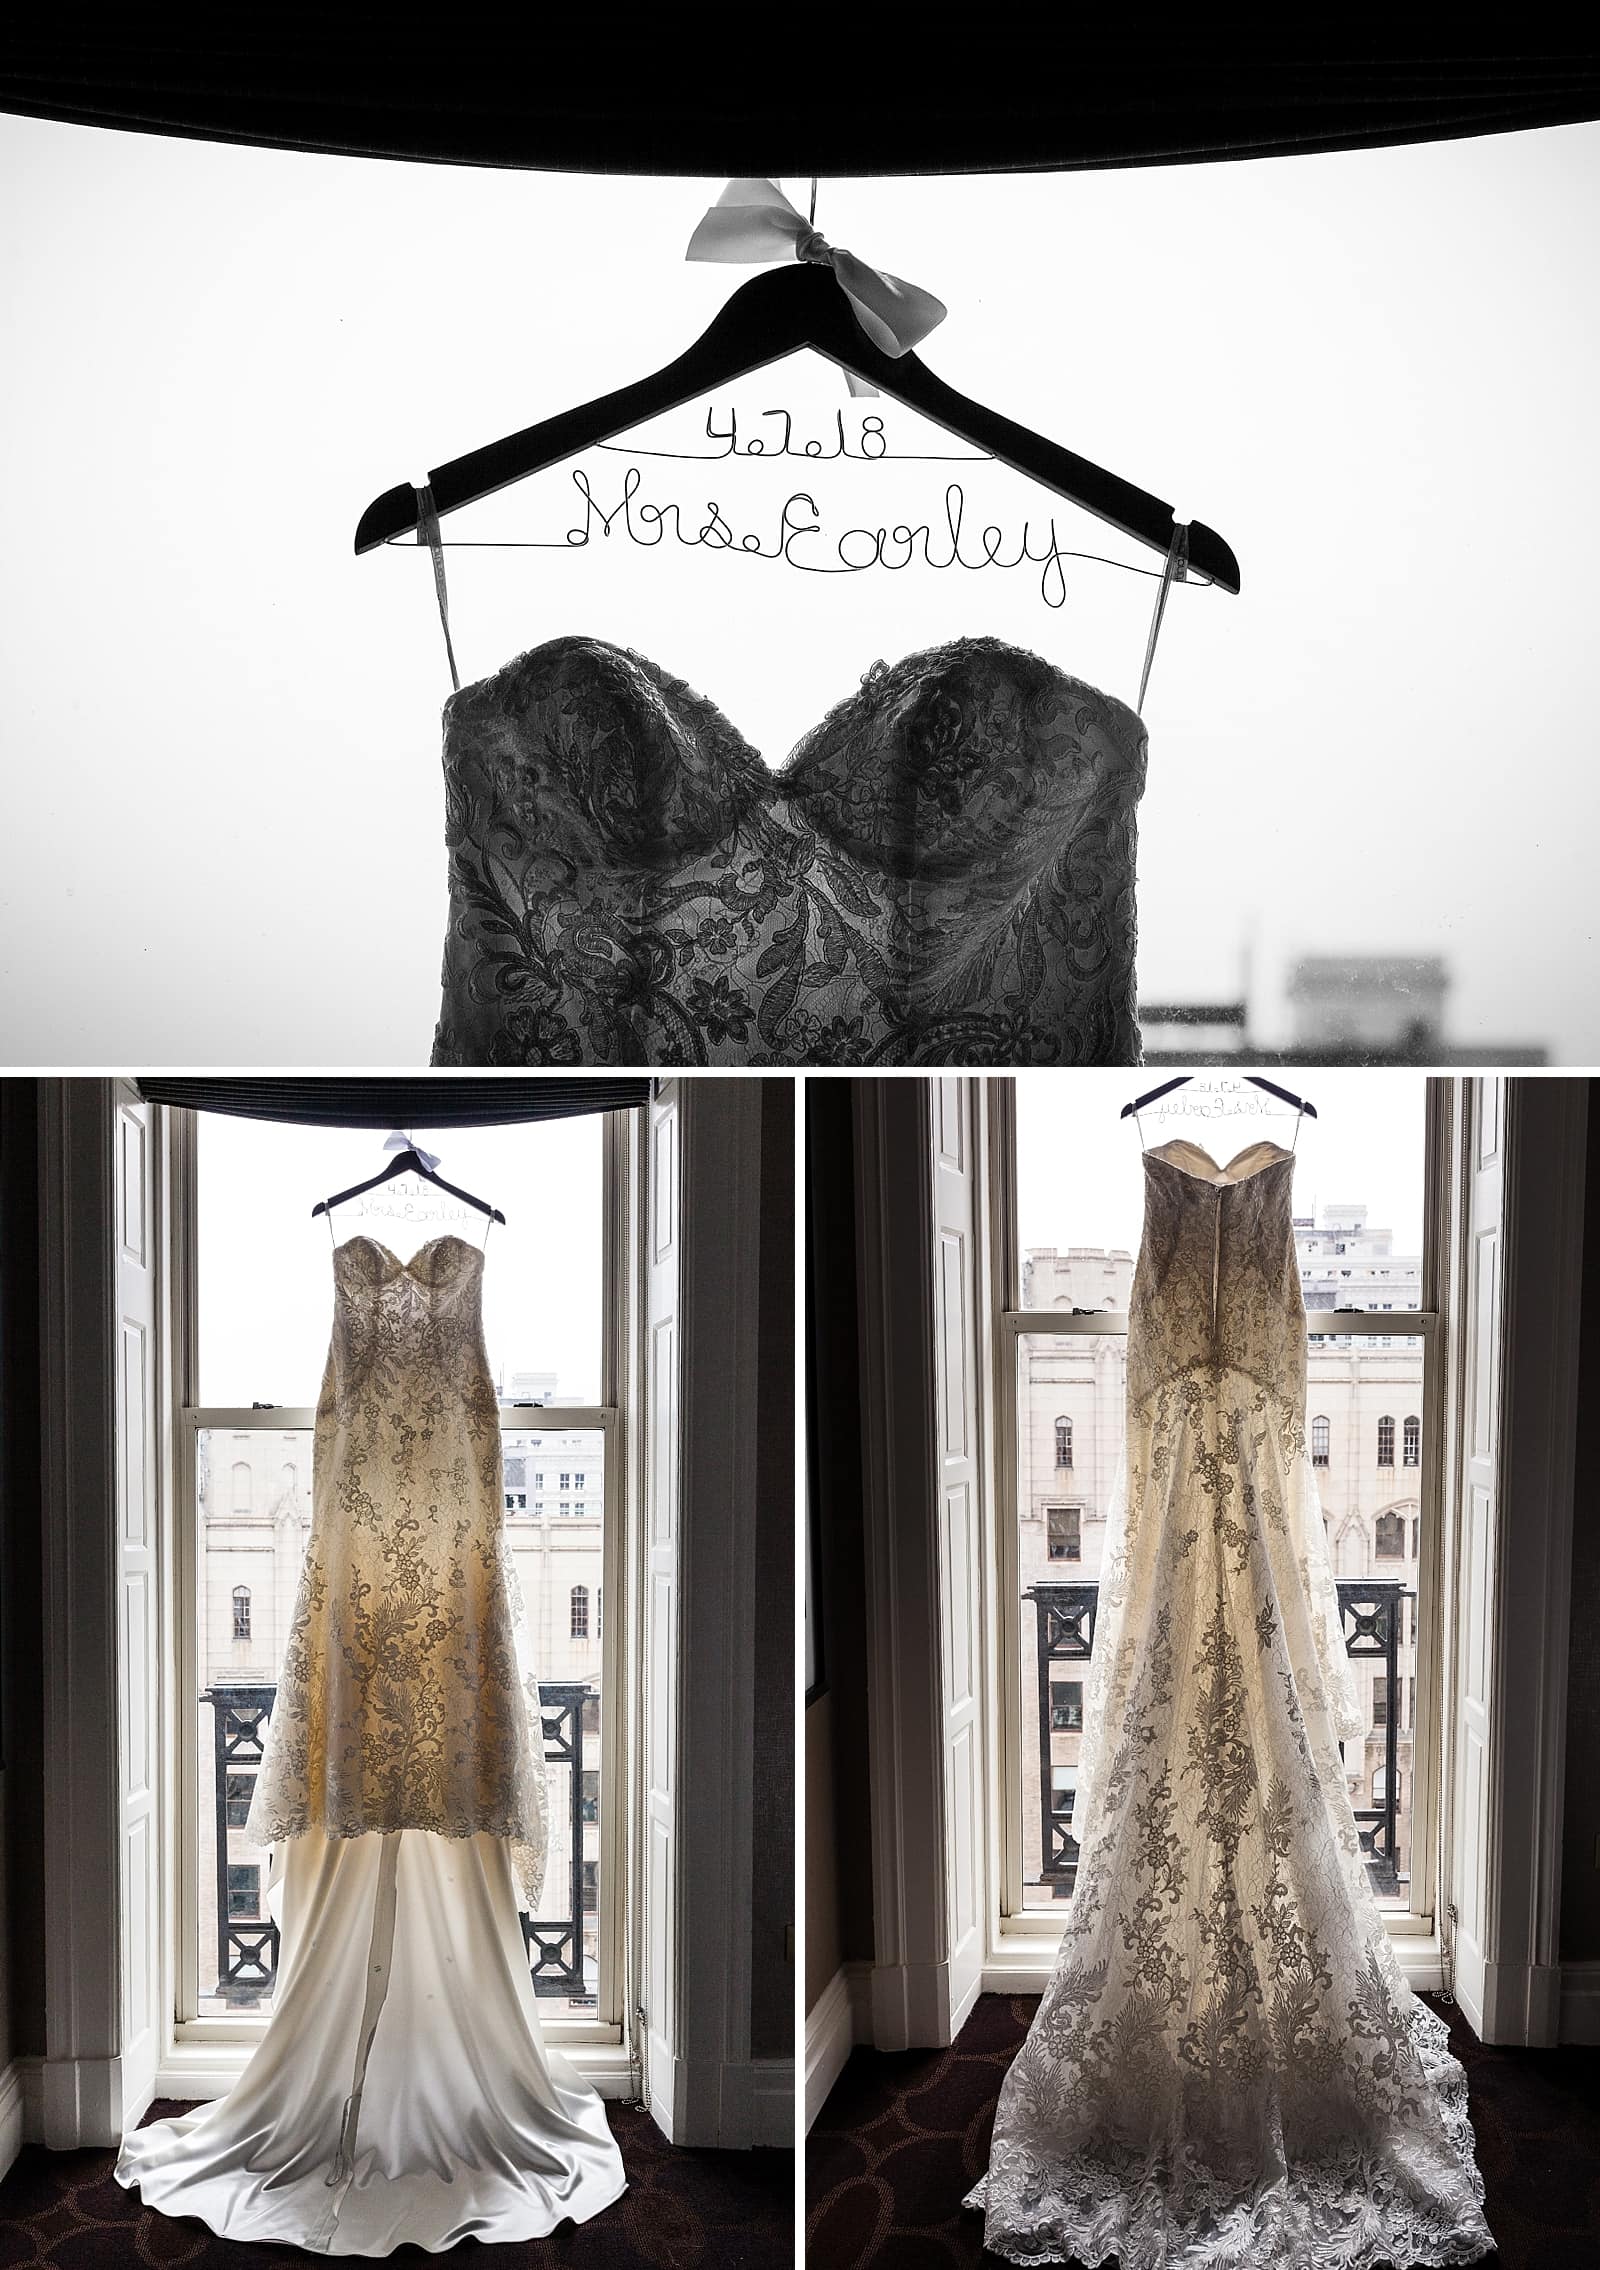 Bridal gown hanging in window, detailed hanger, lace bridal gown